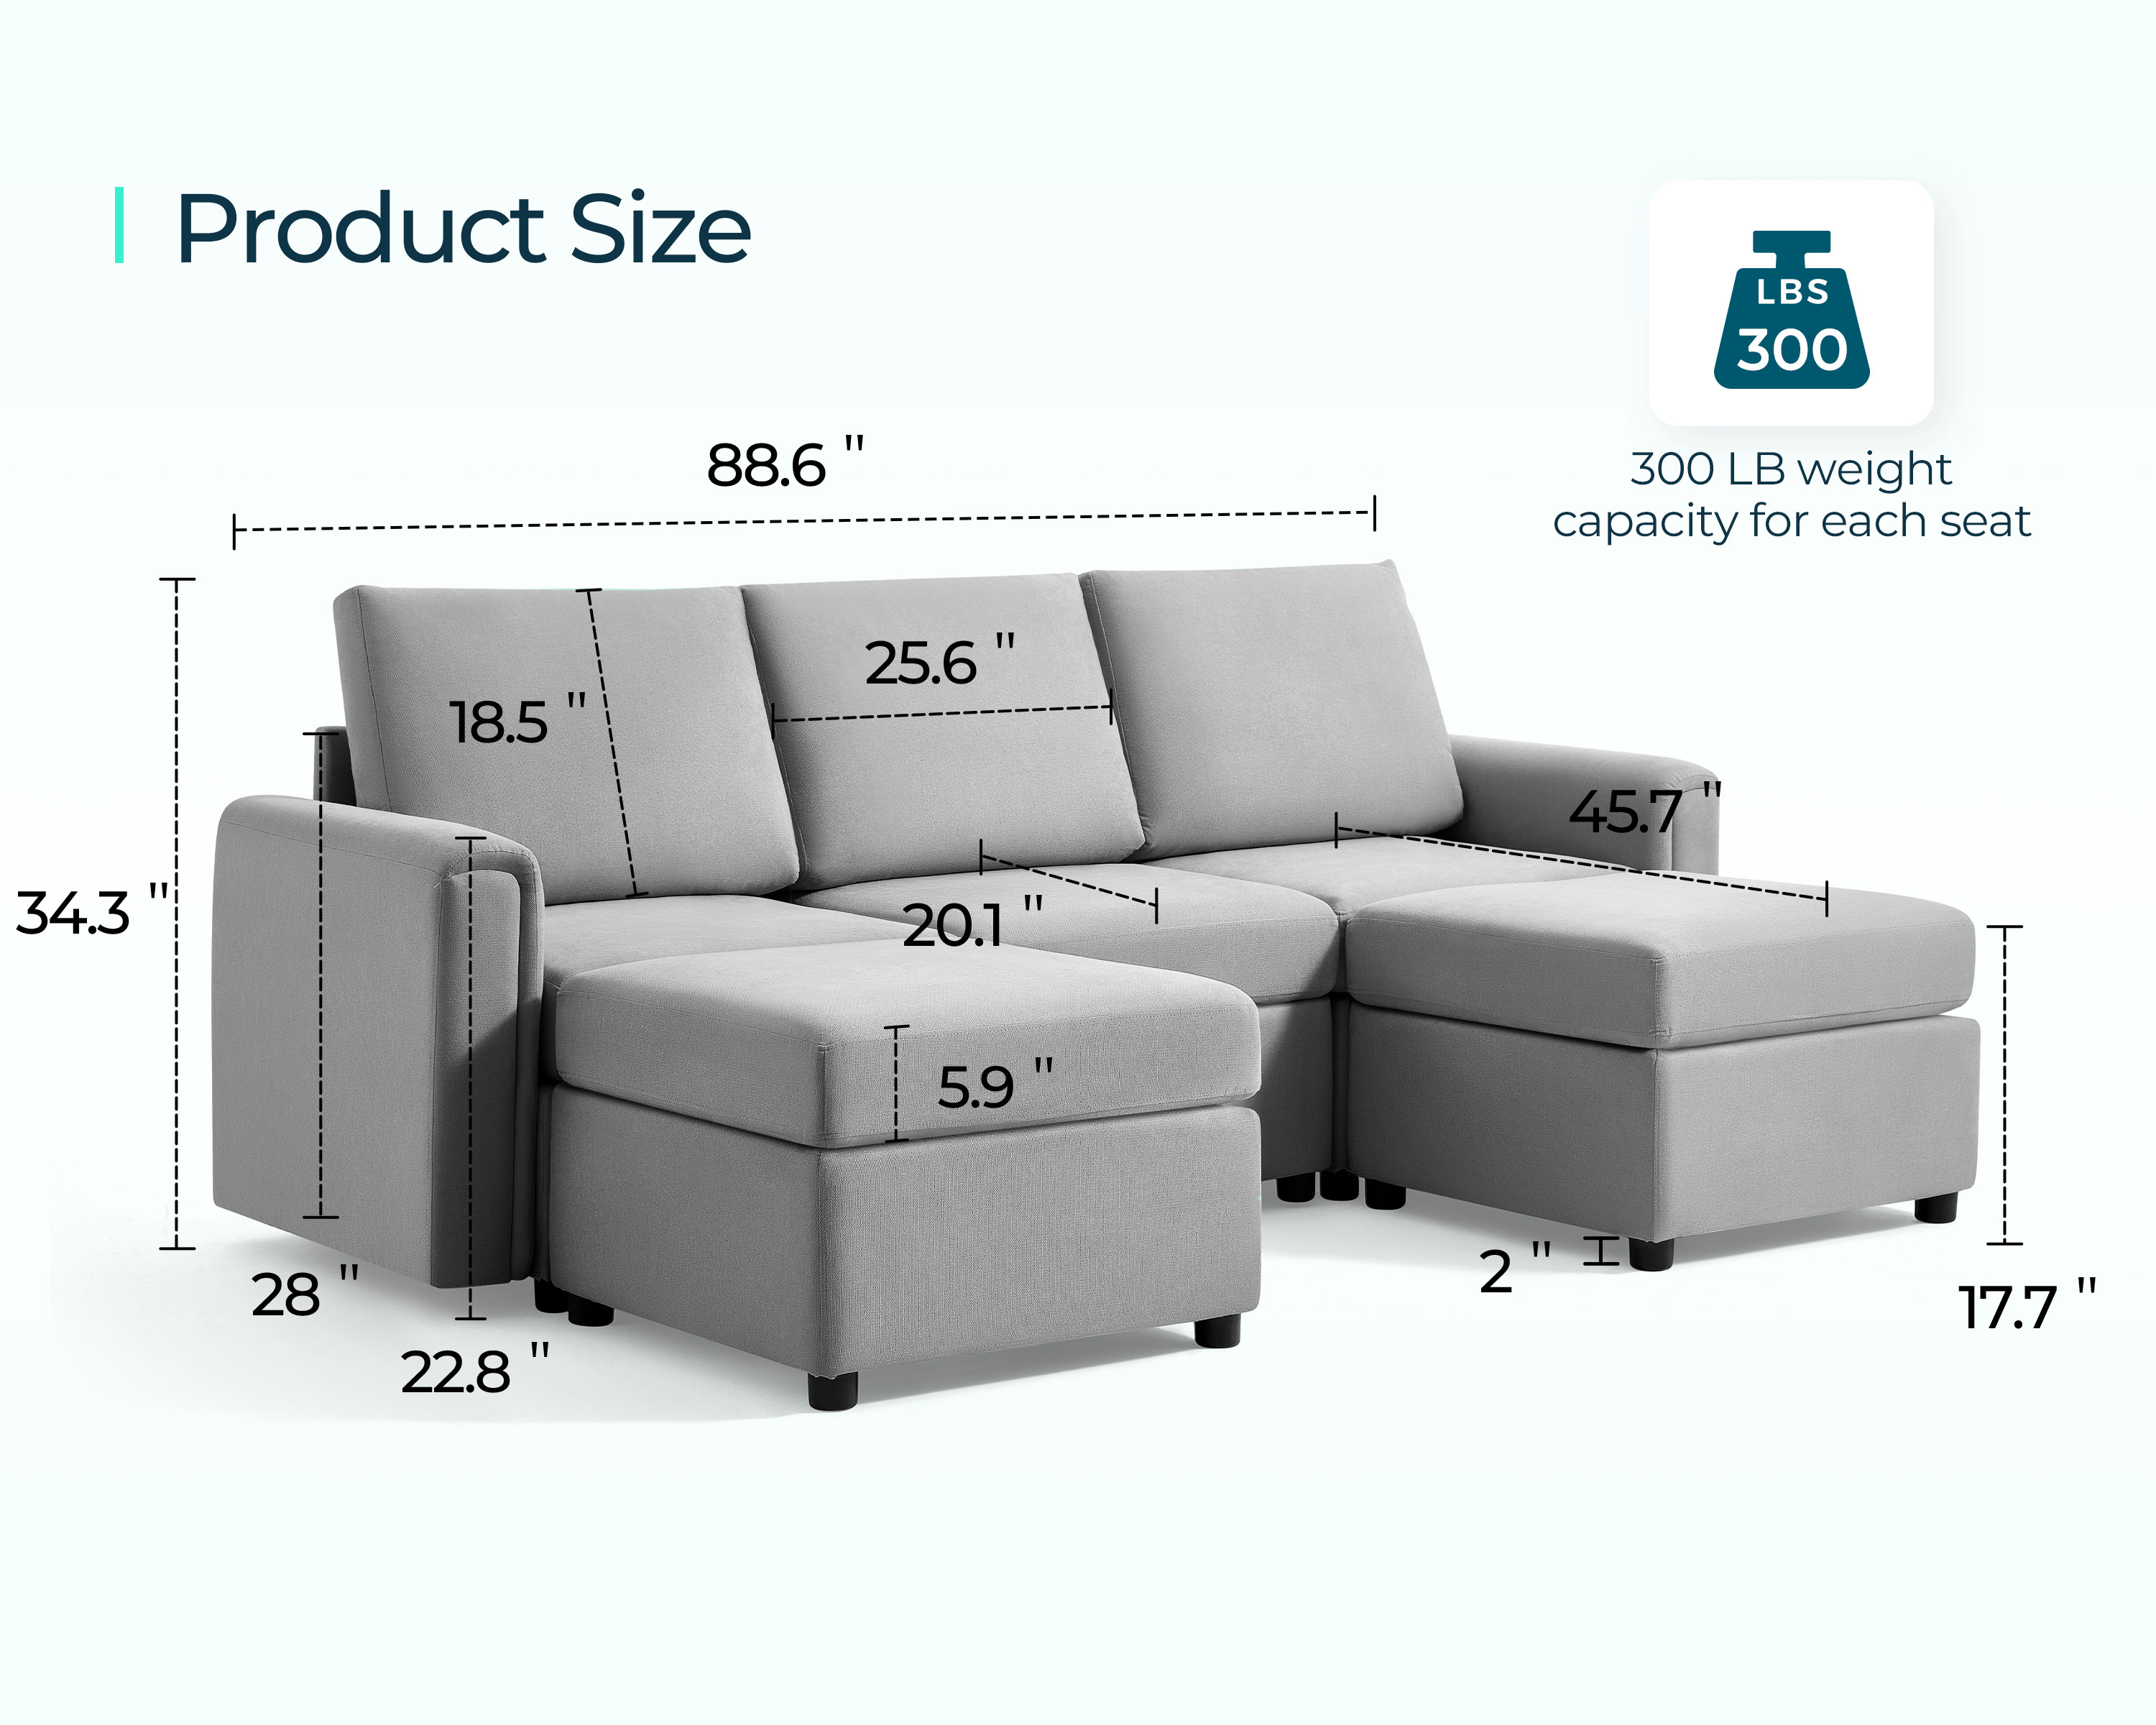 LINSY HOME Modular Couches and Sofas Sectional with Storage Sectional Sofa U Shaped Sectional Couch with Reversible Chaises, Light Gray - image 3 of 11